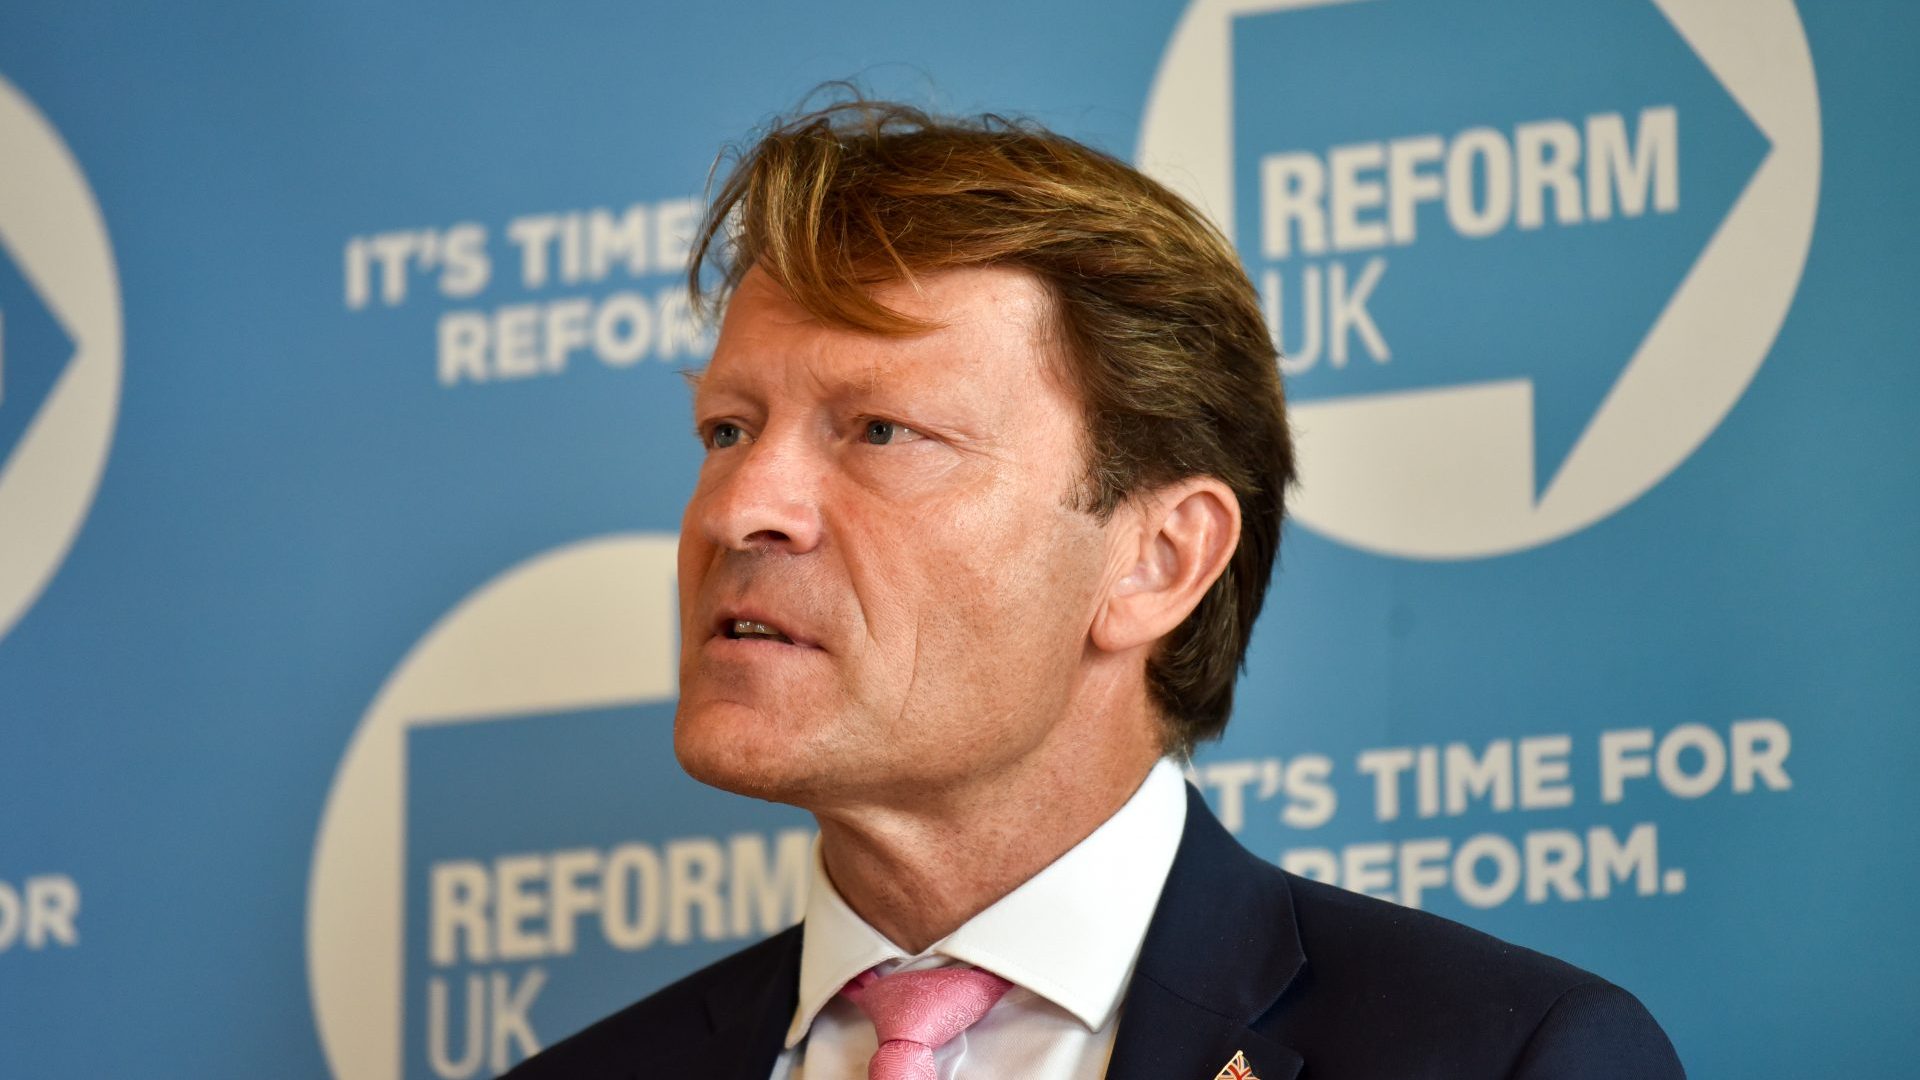 Richard Tice, the leader of Reform UK gives a press conference about Metro Bank. Photo: Matthew Chattle/Barcroft Media via Getty Images.